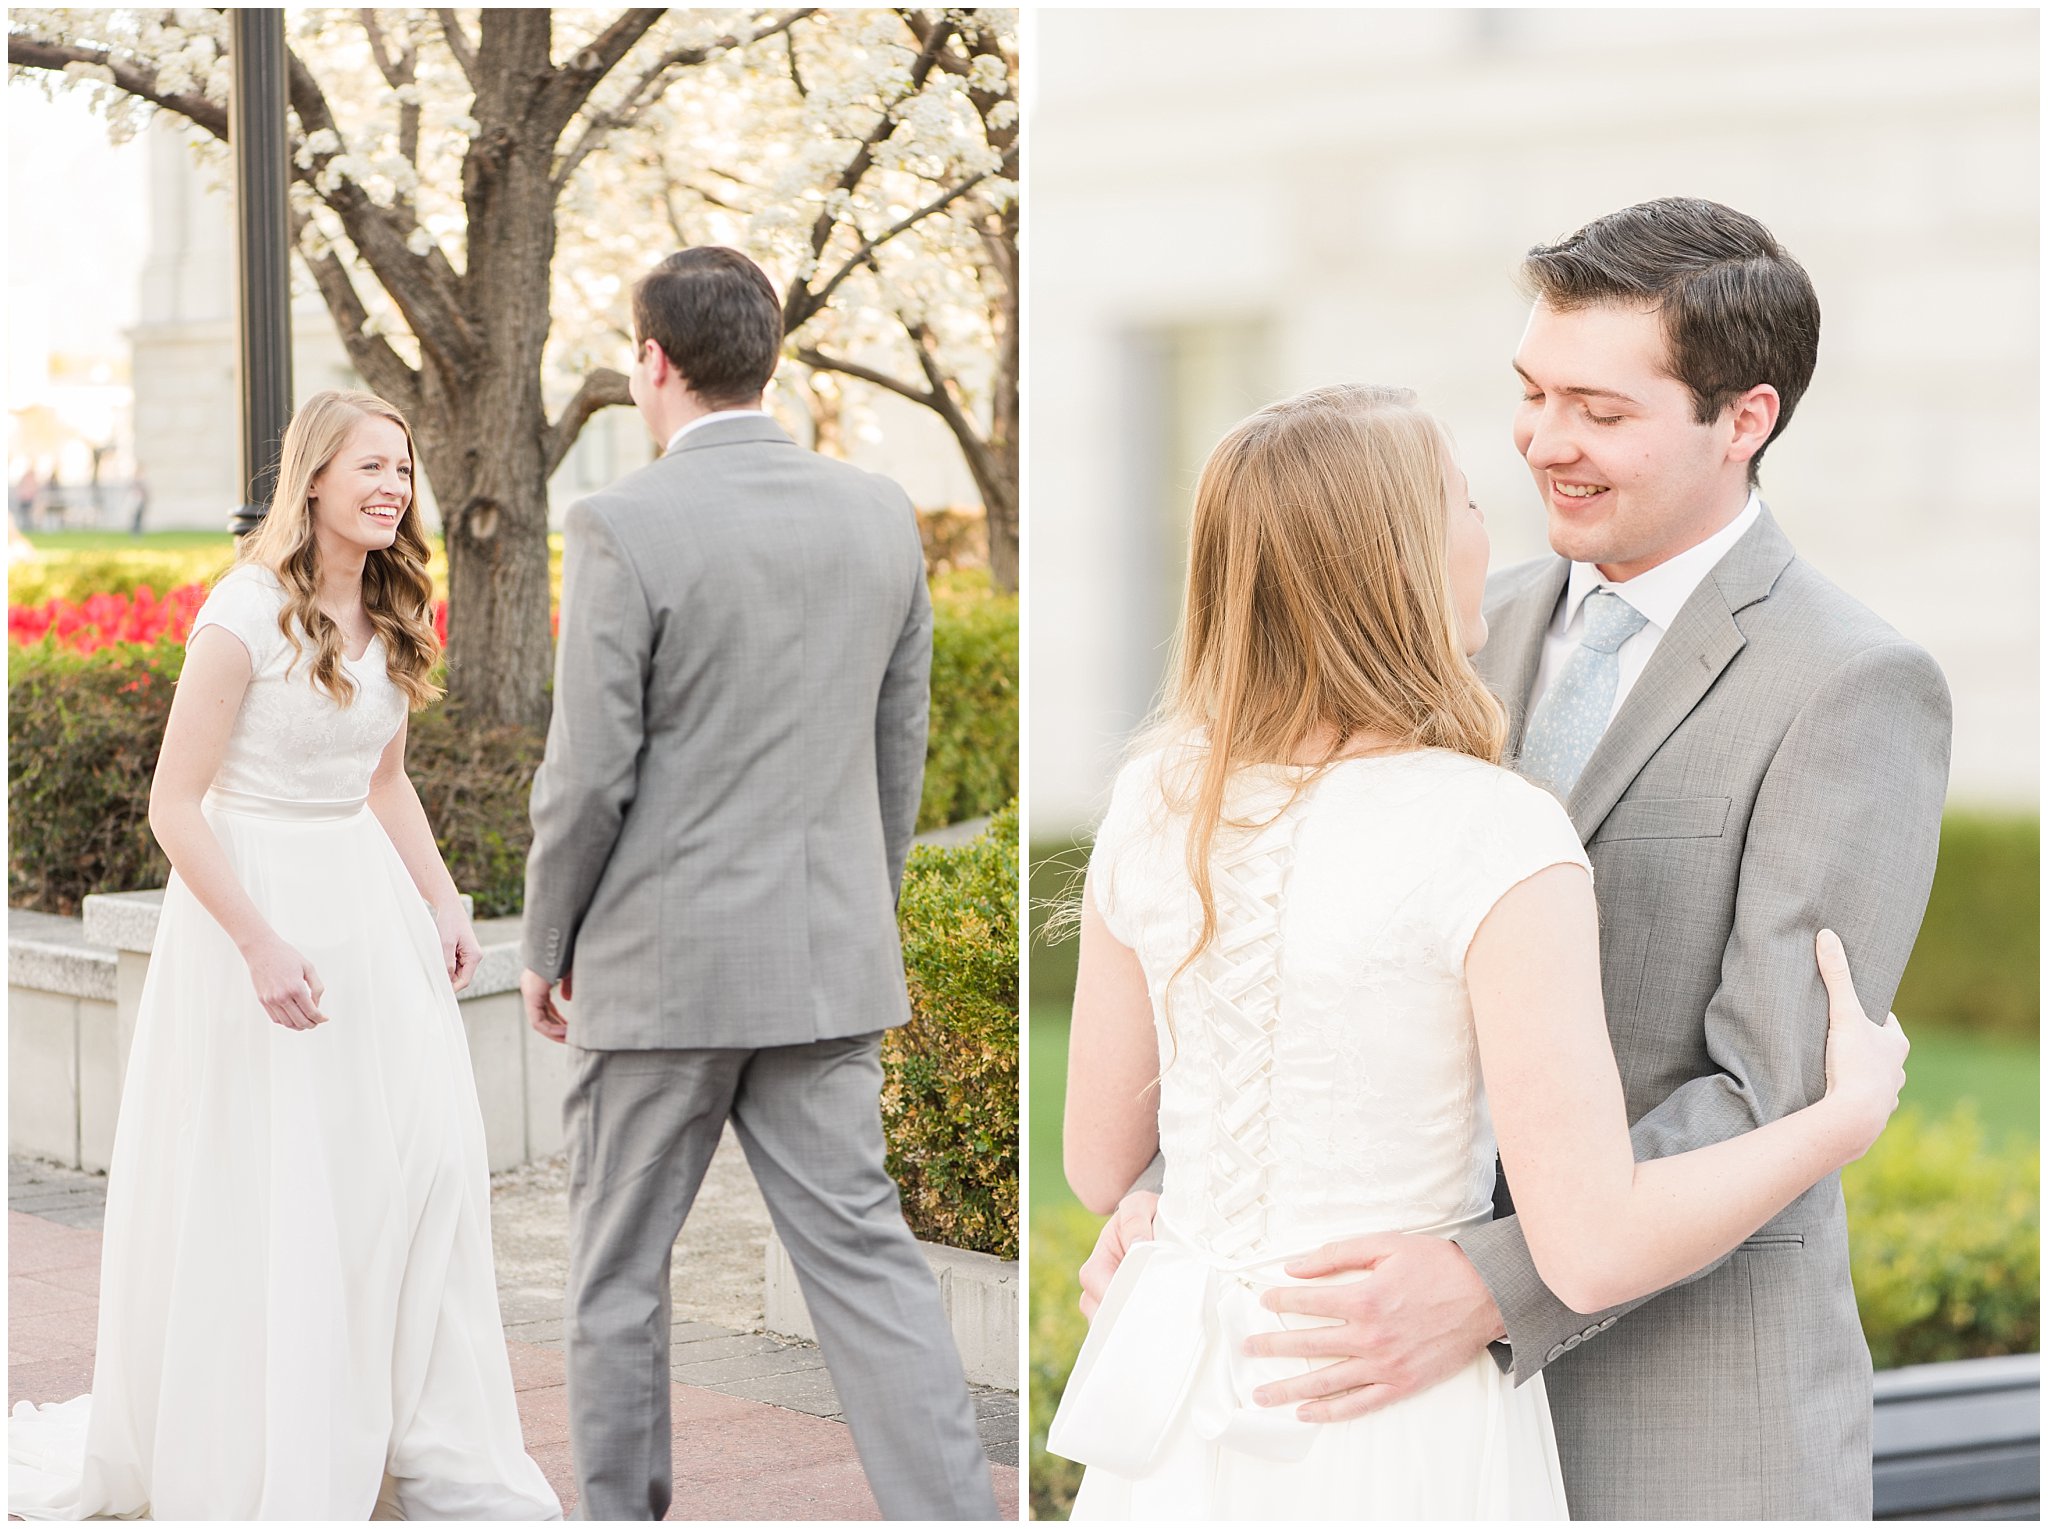 Bride with blush bouquet and groom with grey suit in the blossoms for first look | Utah State Capitol Blossoms Formal Session | Salt Lake Wedding Photographers | Jessie and Dallin Photography